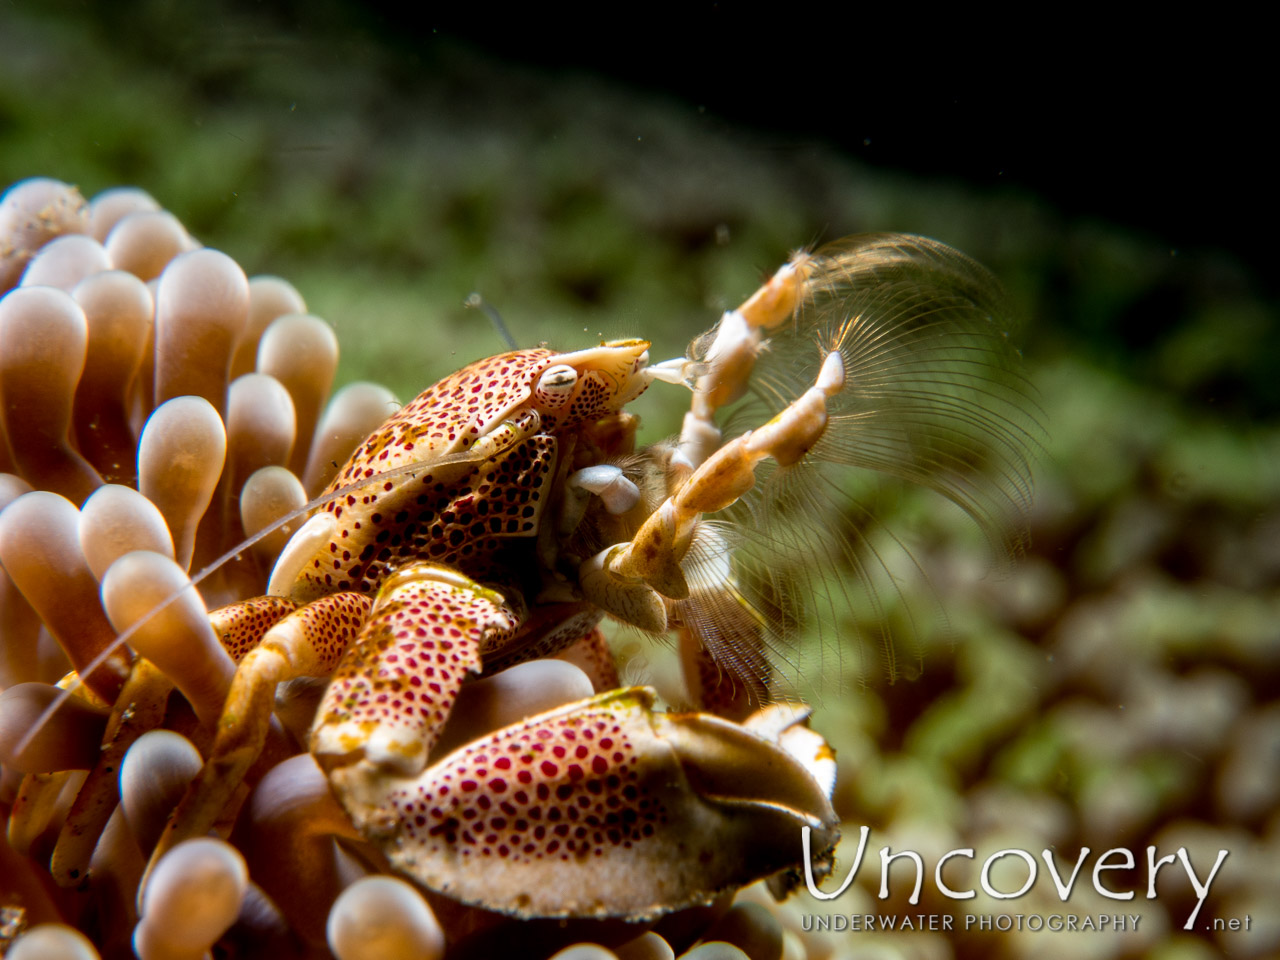 Spotted Porcelain Crab (neopetrolisthes Maculatus), photo taken in Indonesia, North Sulawesi, Lembeh Strait, TK 1